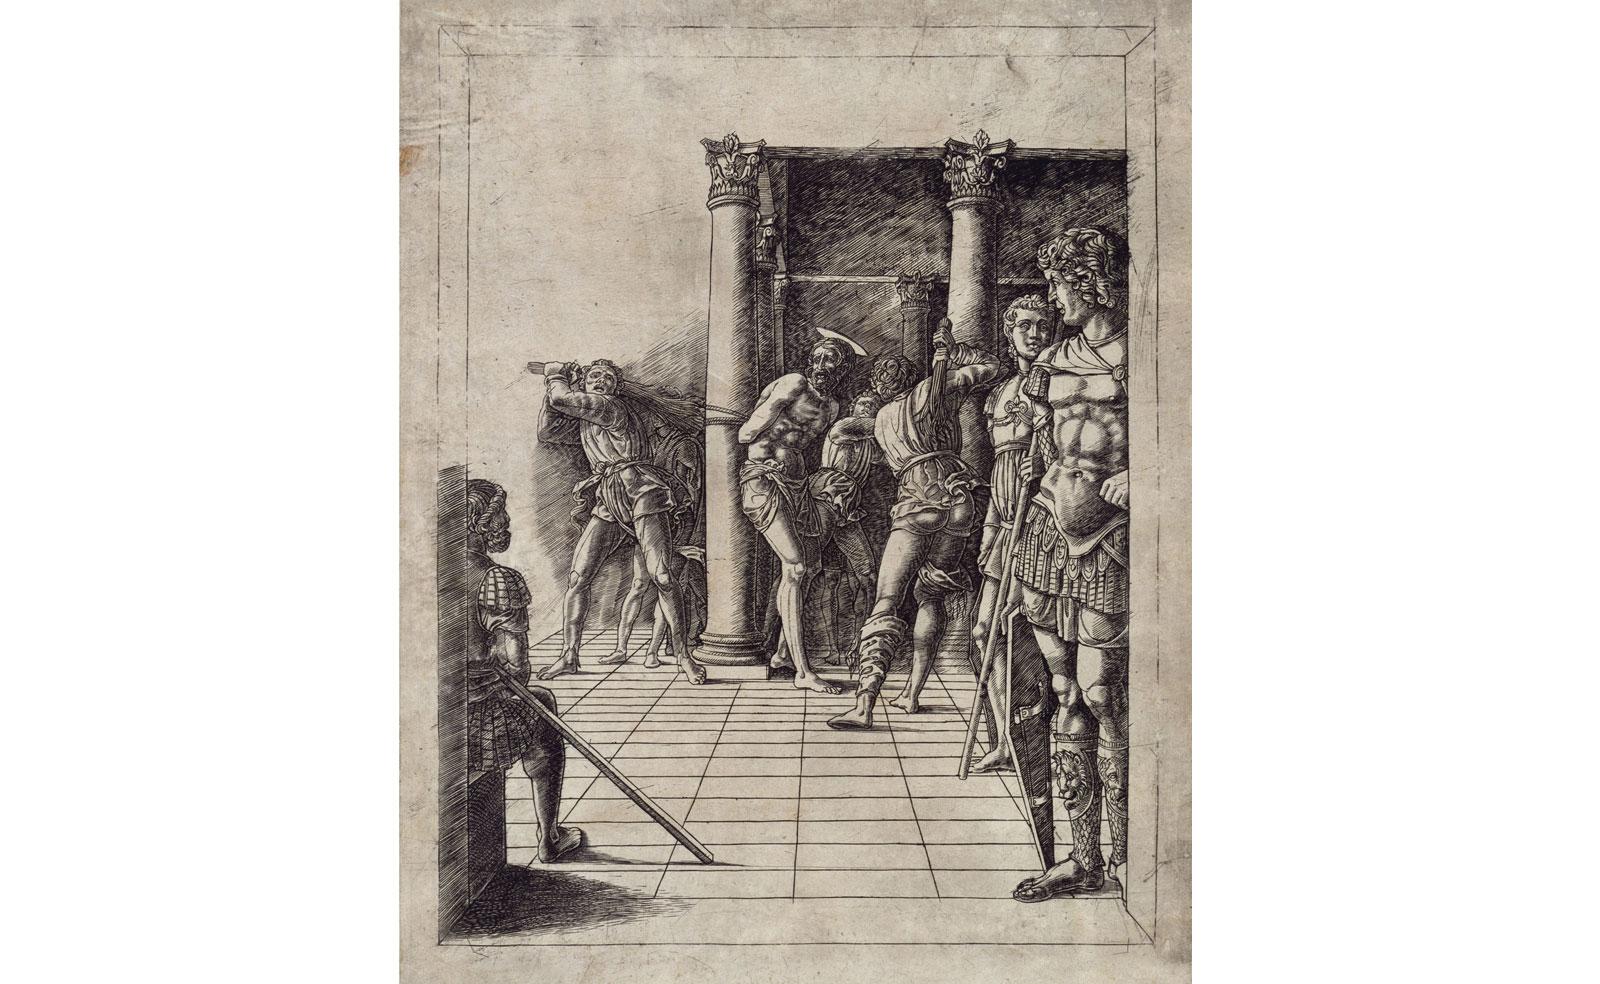 The Flagellation with Pavement by Andrea Mantegna (and unknown engraver).